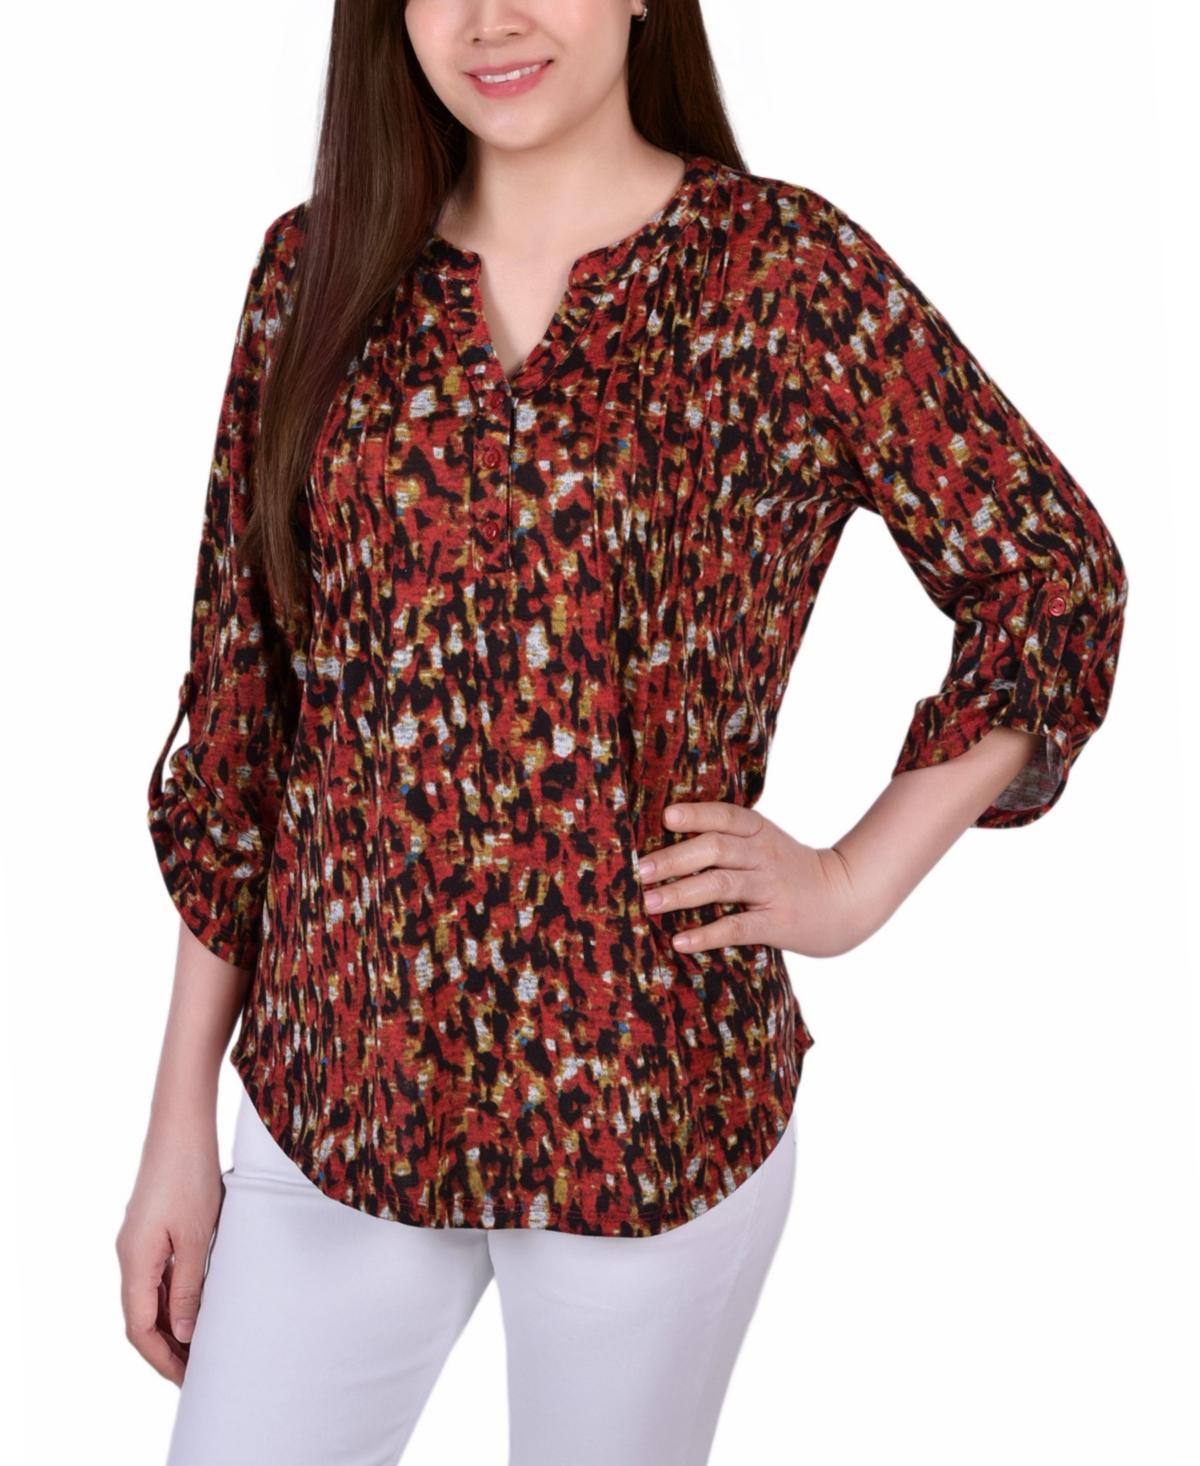 NY COLLECTION WOMEN'S MISSY 3/4 ROLL SLEEVE TOP